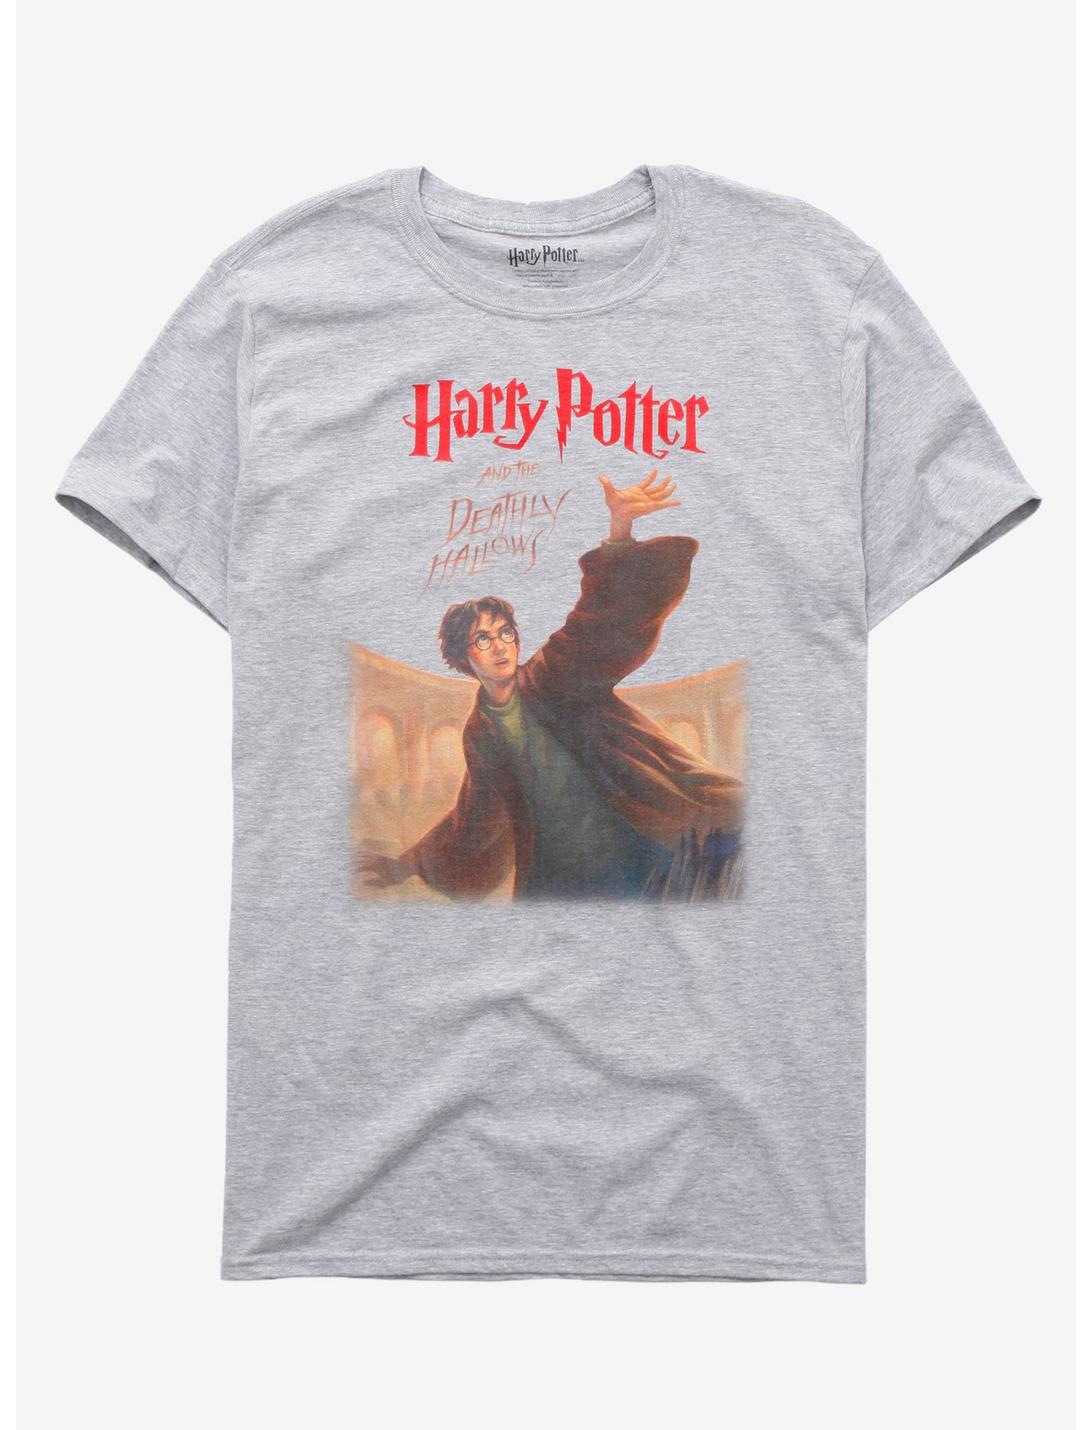 Harry Potter And The Deathly Hallows Book Cover T-Shirt, HEATHER GREY, hi-res